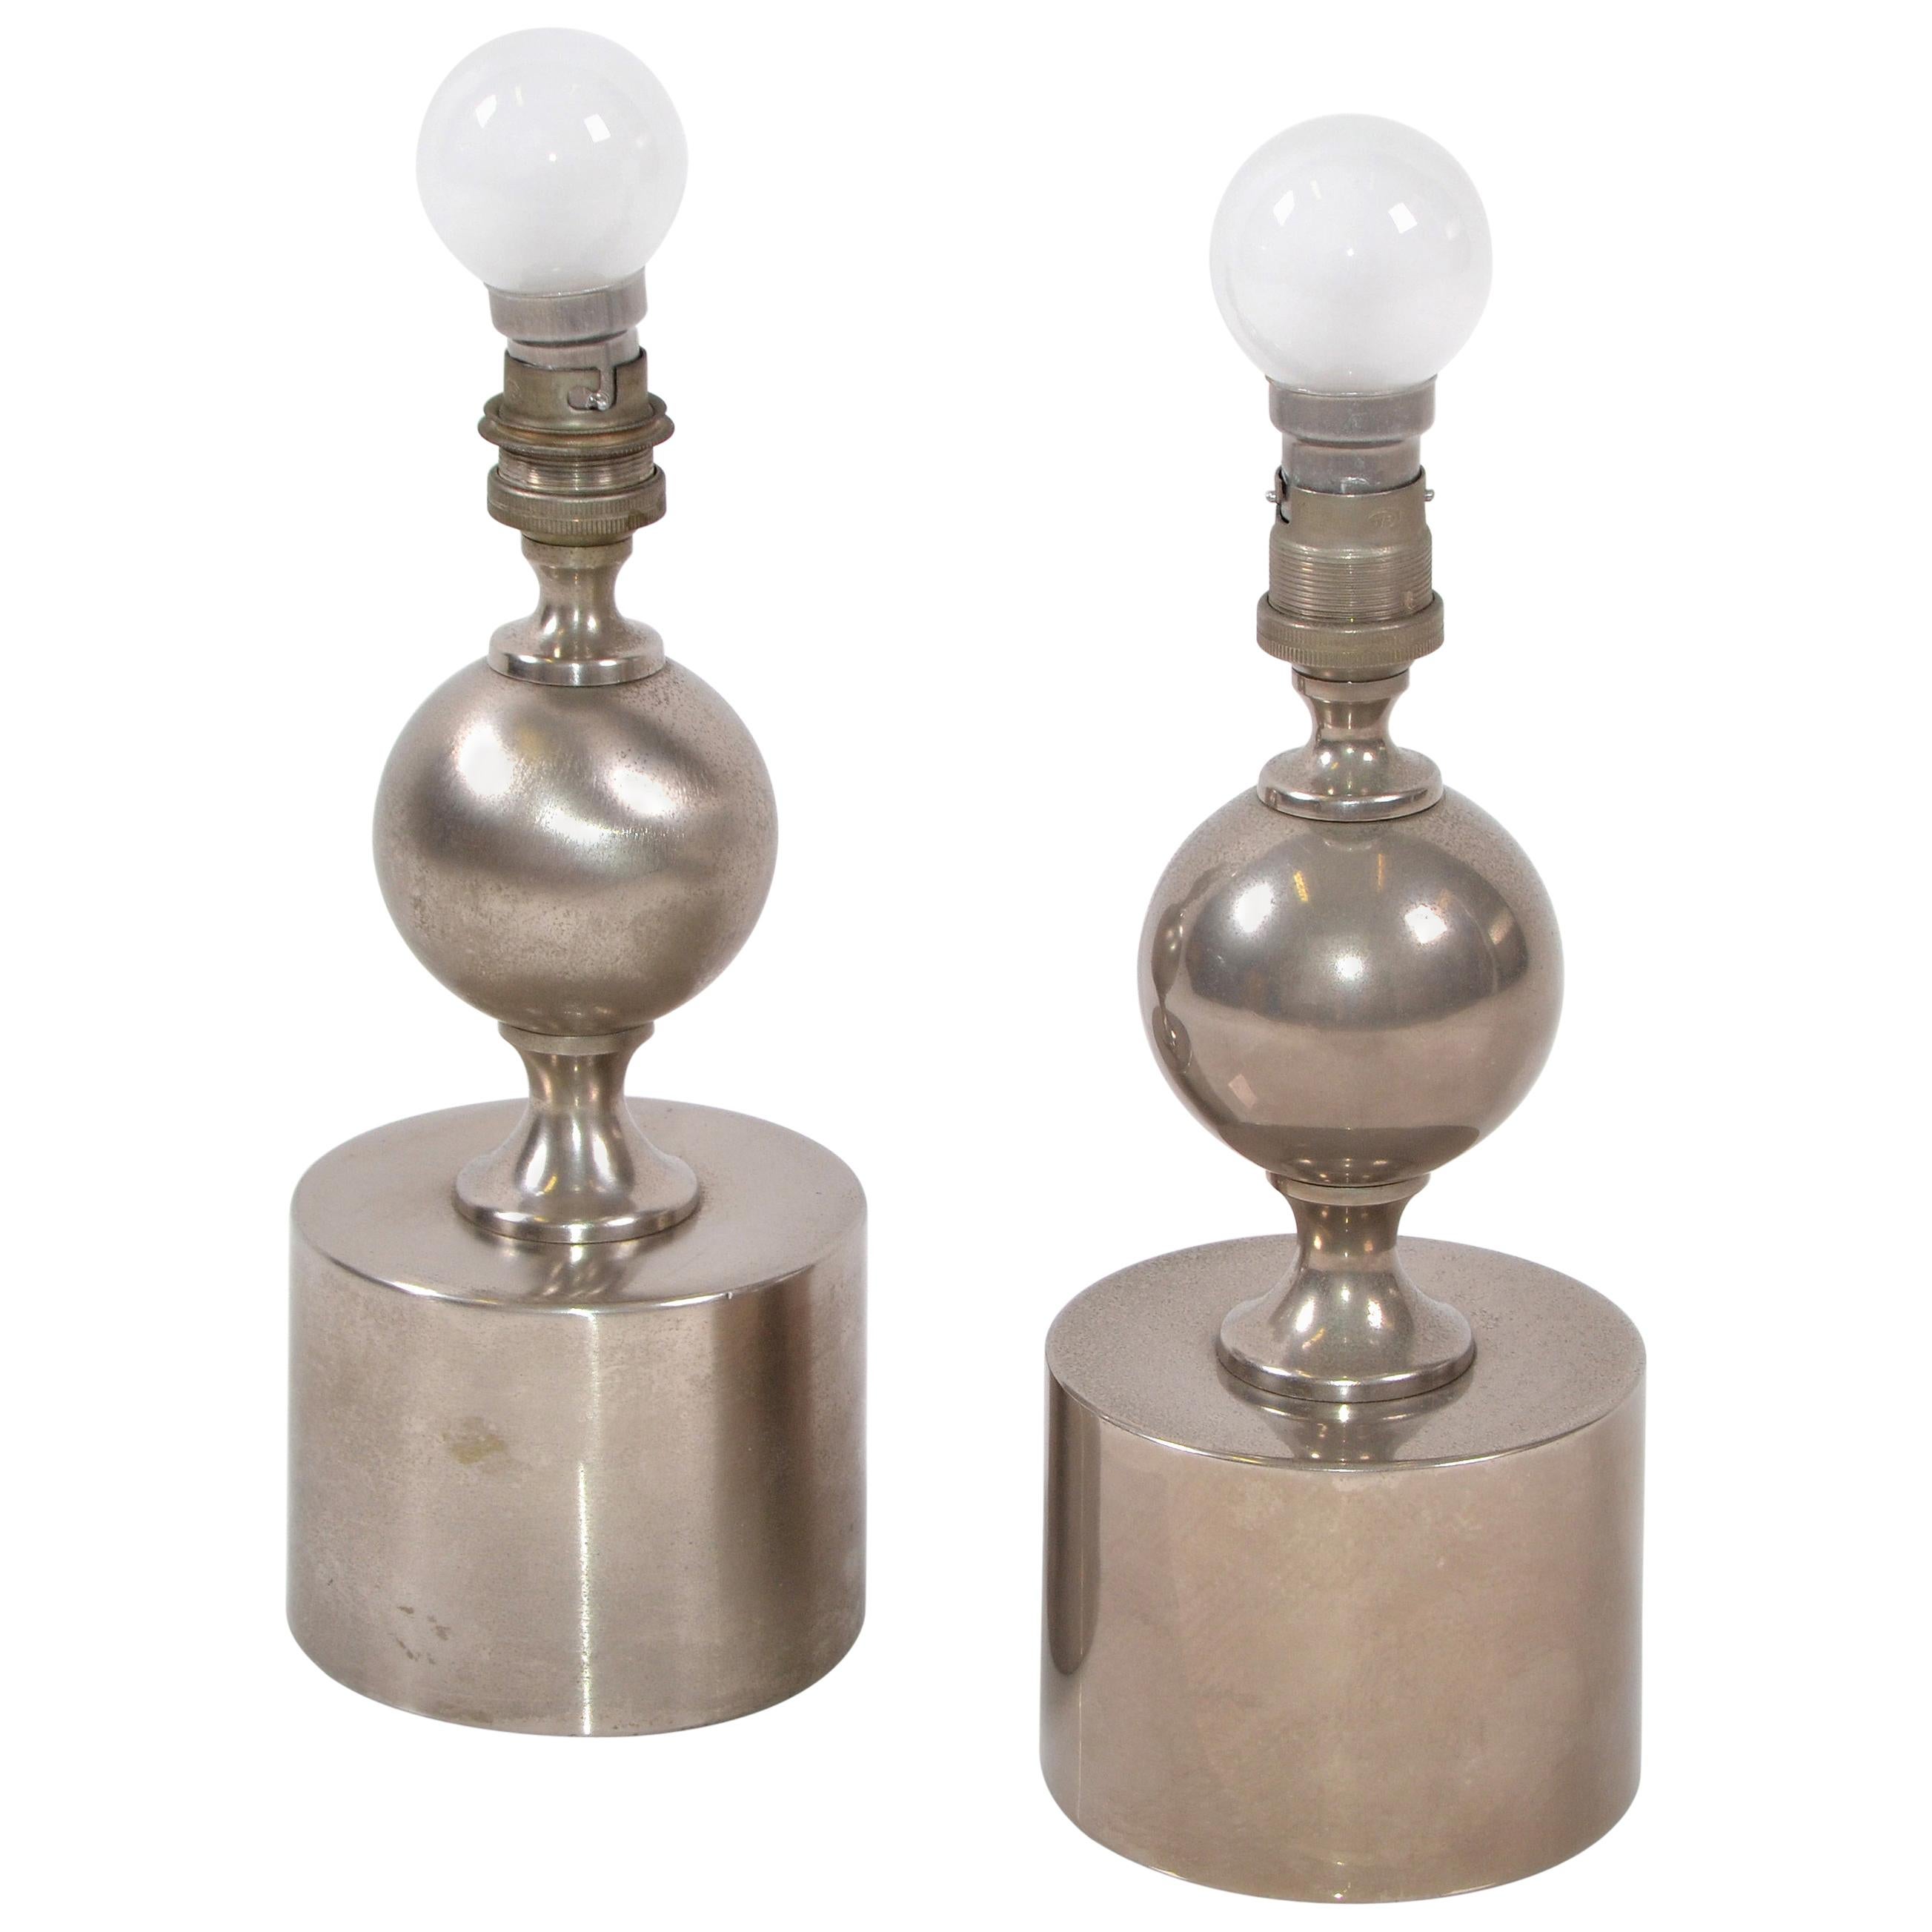 Maison Barbier French Mid-Century Modern Small One Sphere Table Lamp 1970, Pair